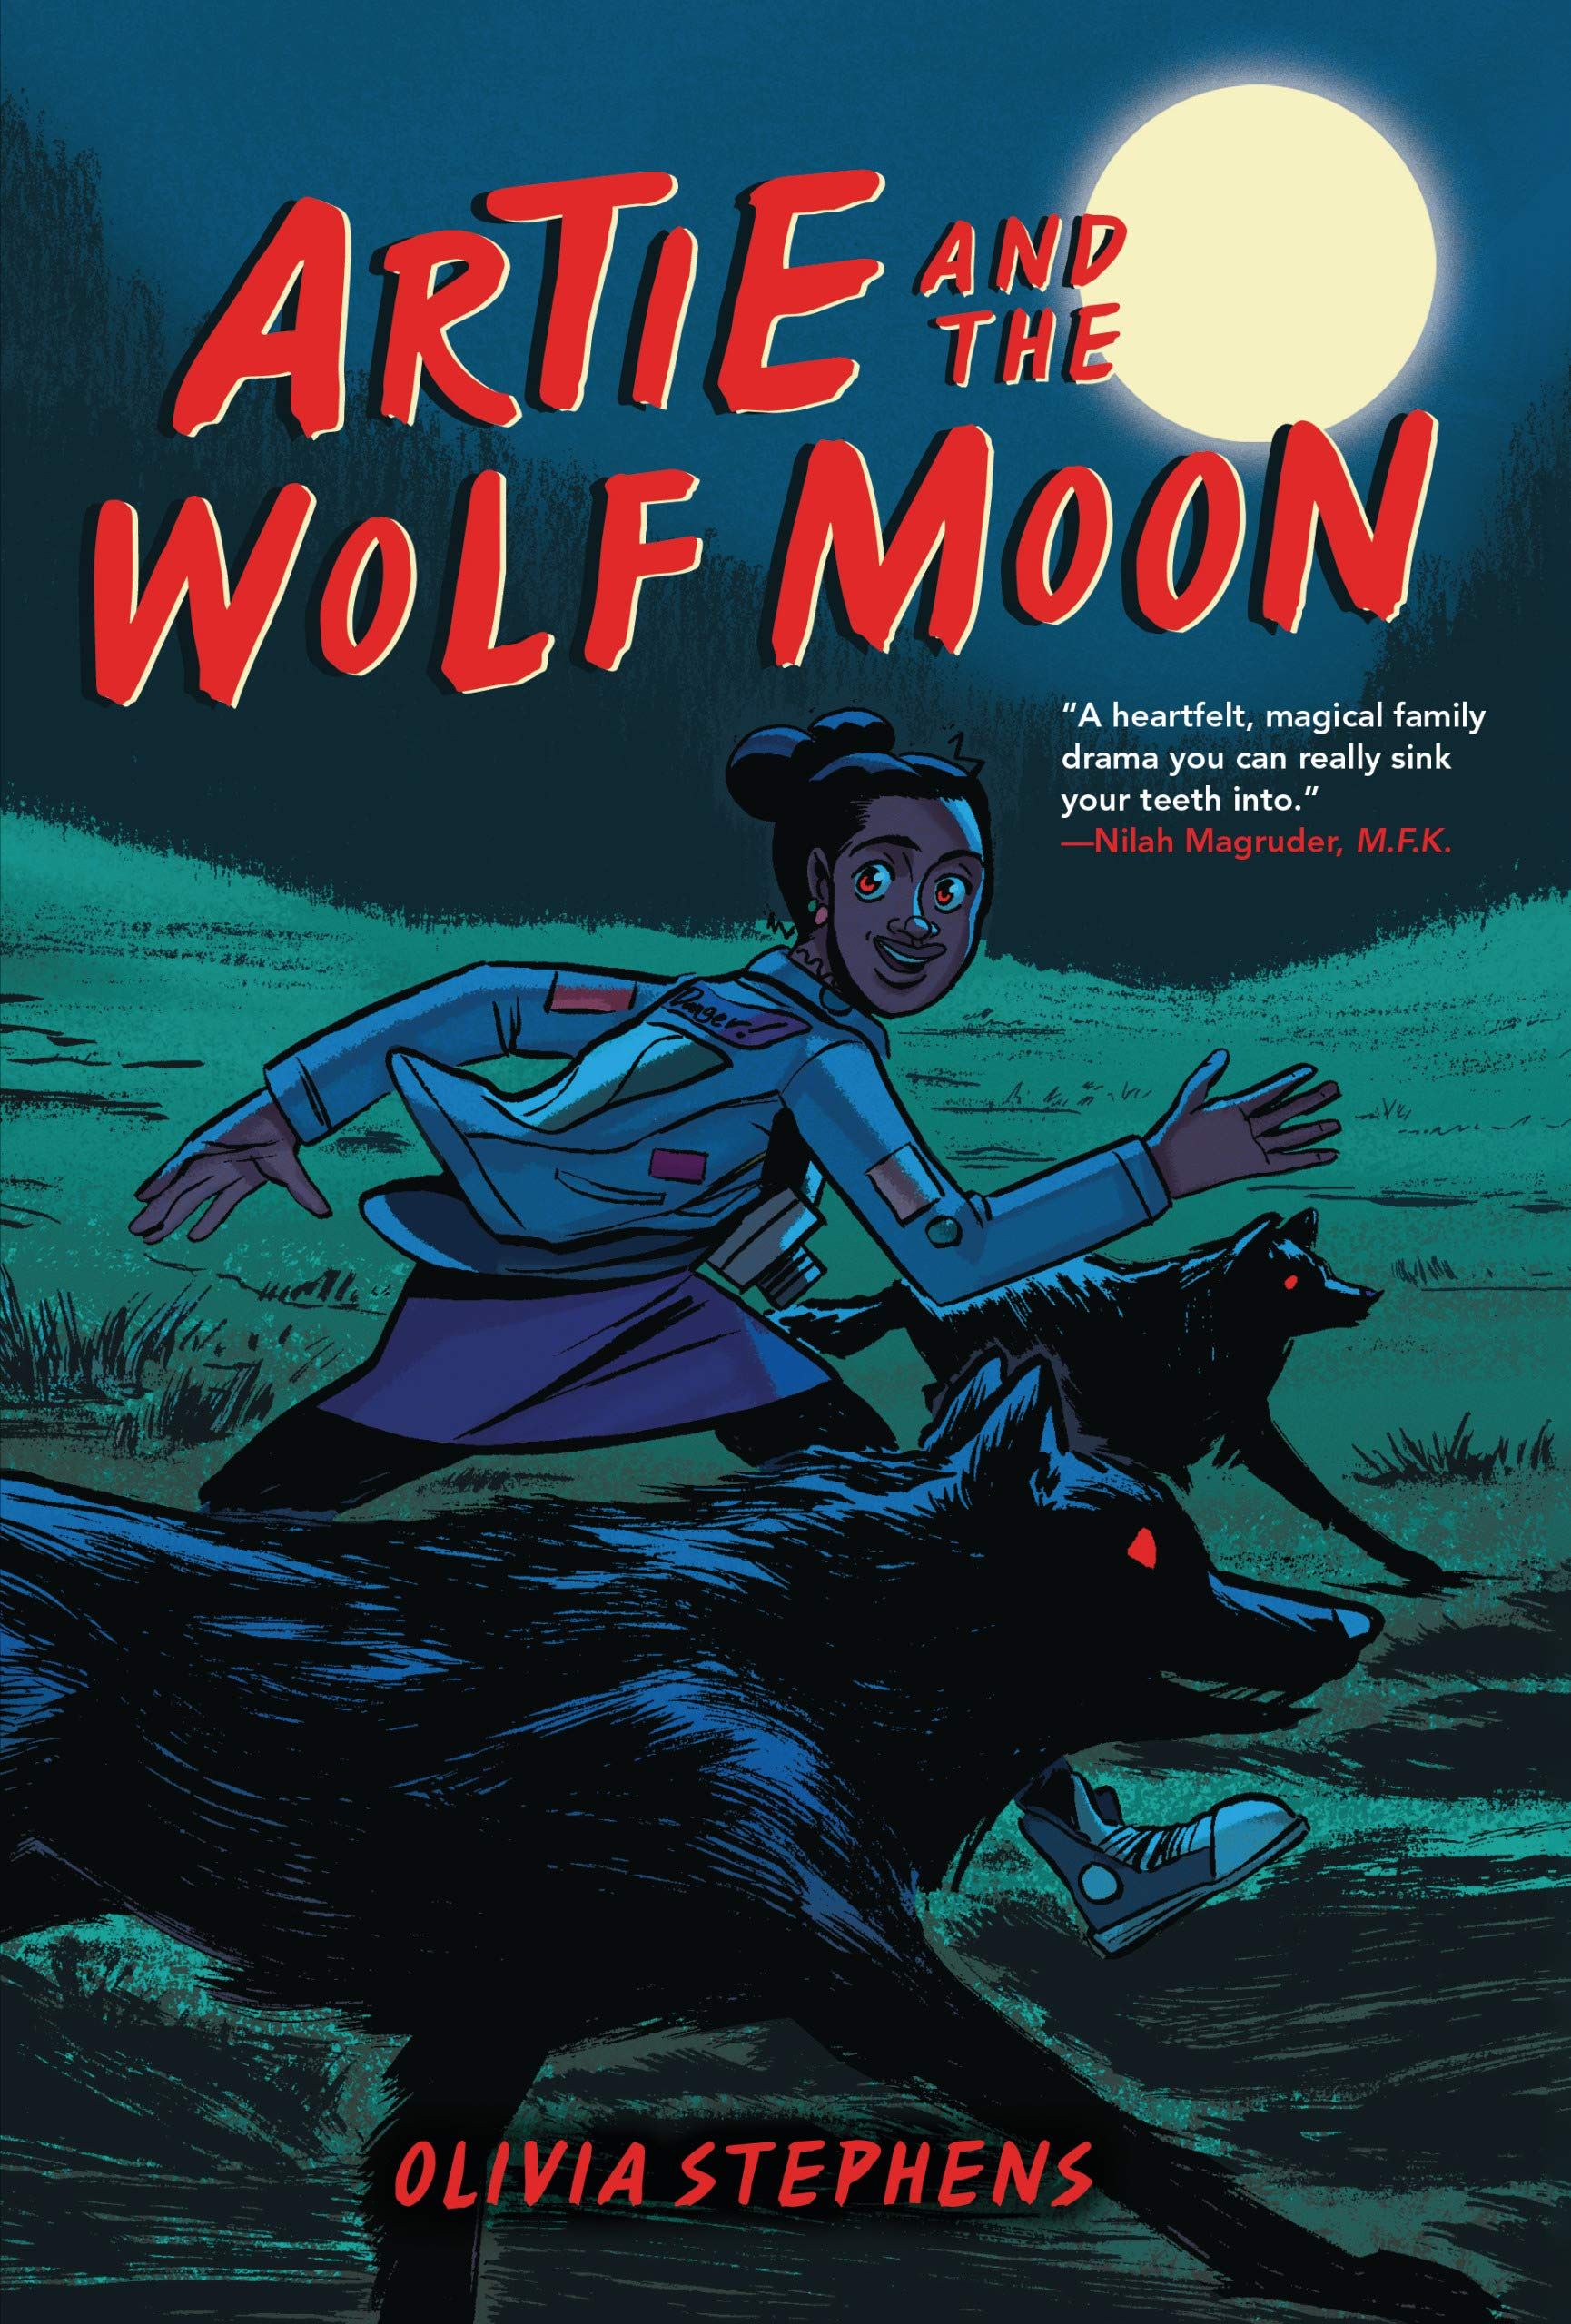 artie and the wolf moon book cover